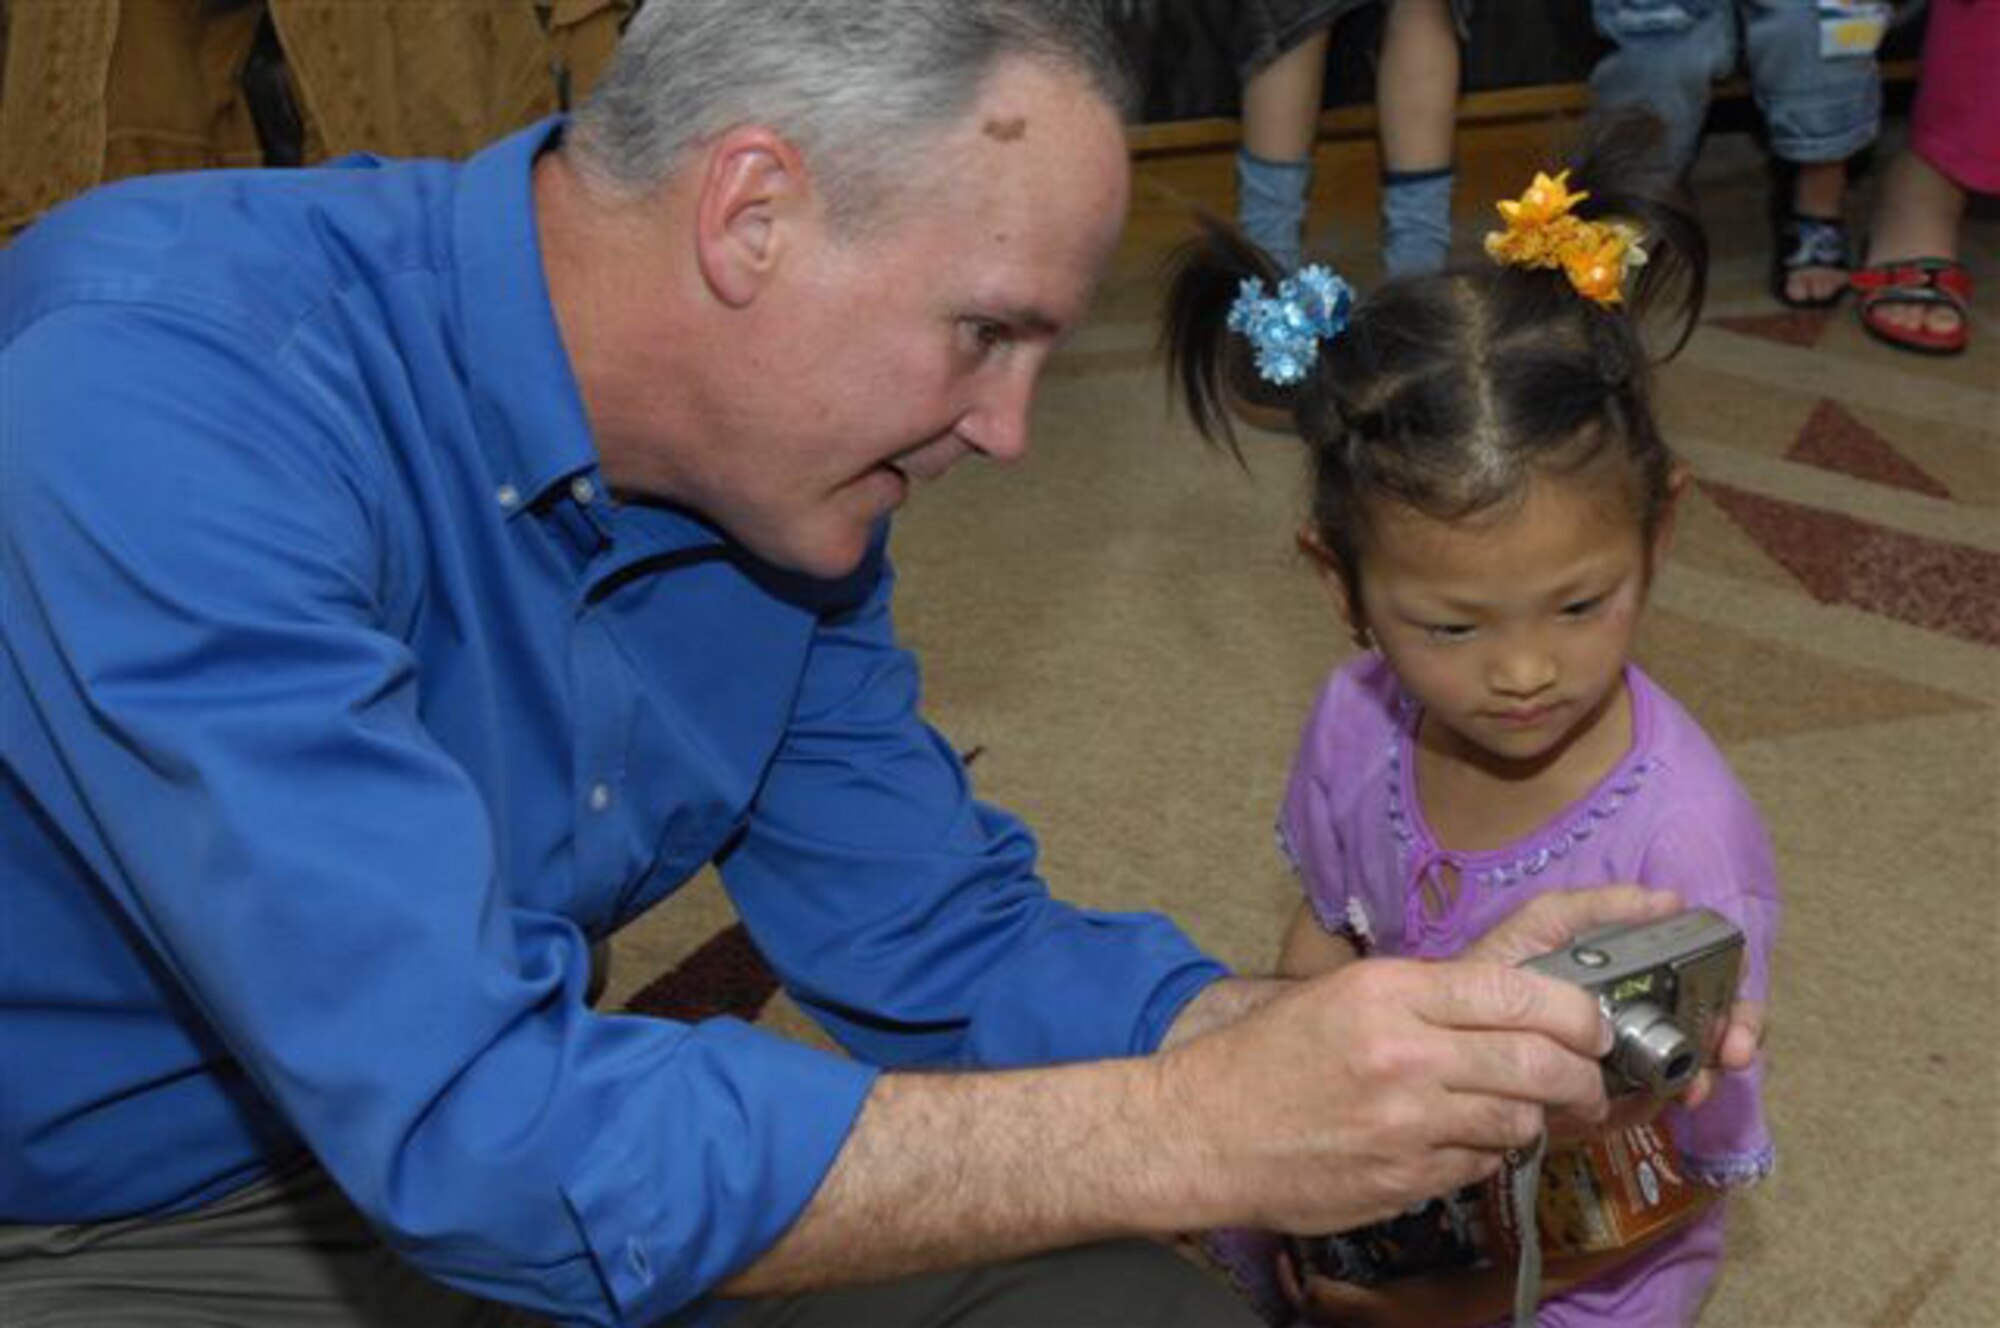 Col. Randall Guthrie shows one of the young patients her picture on his digital camera.